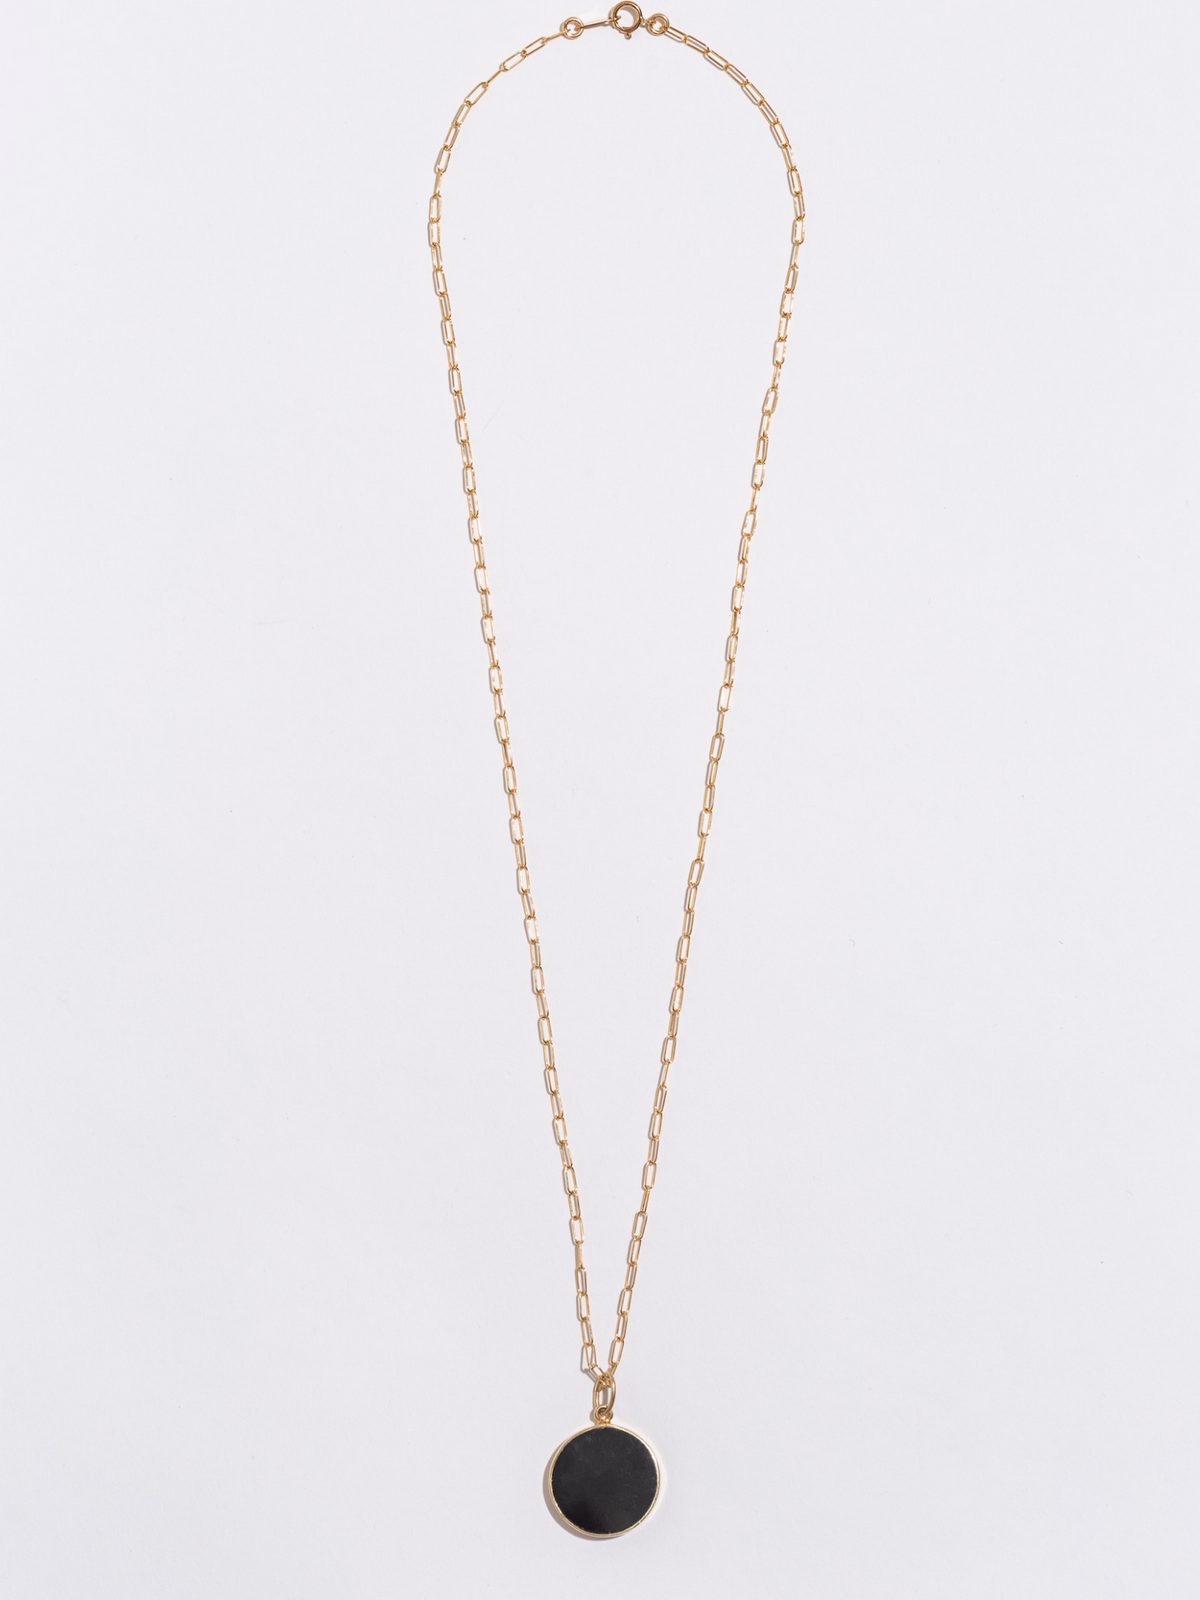 Jessica Onyx Coin Pendant Necklace